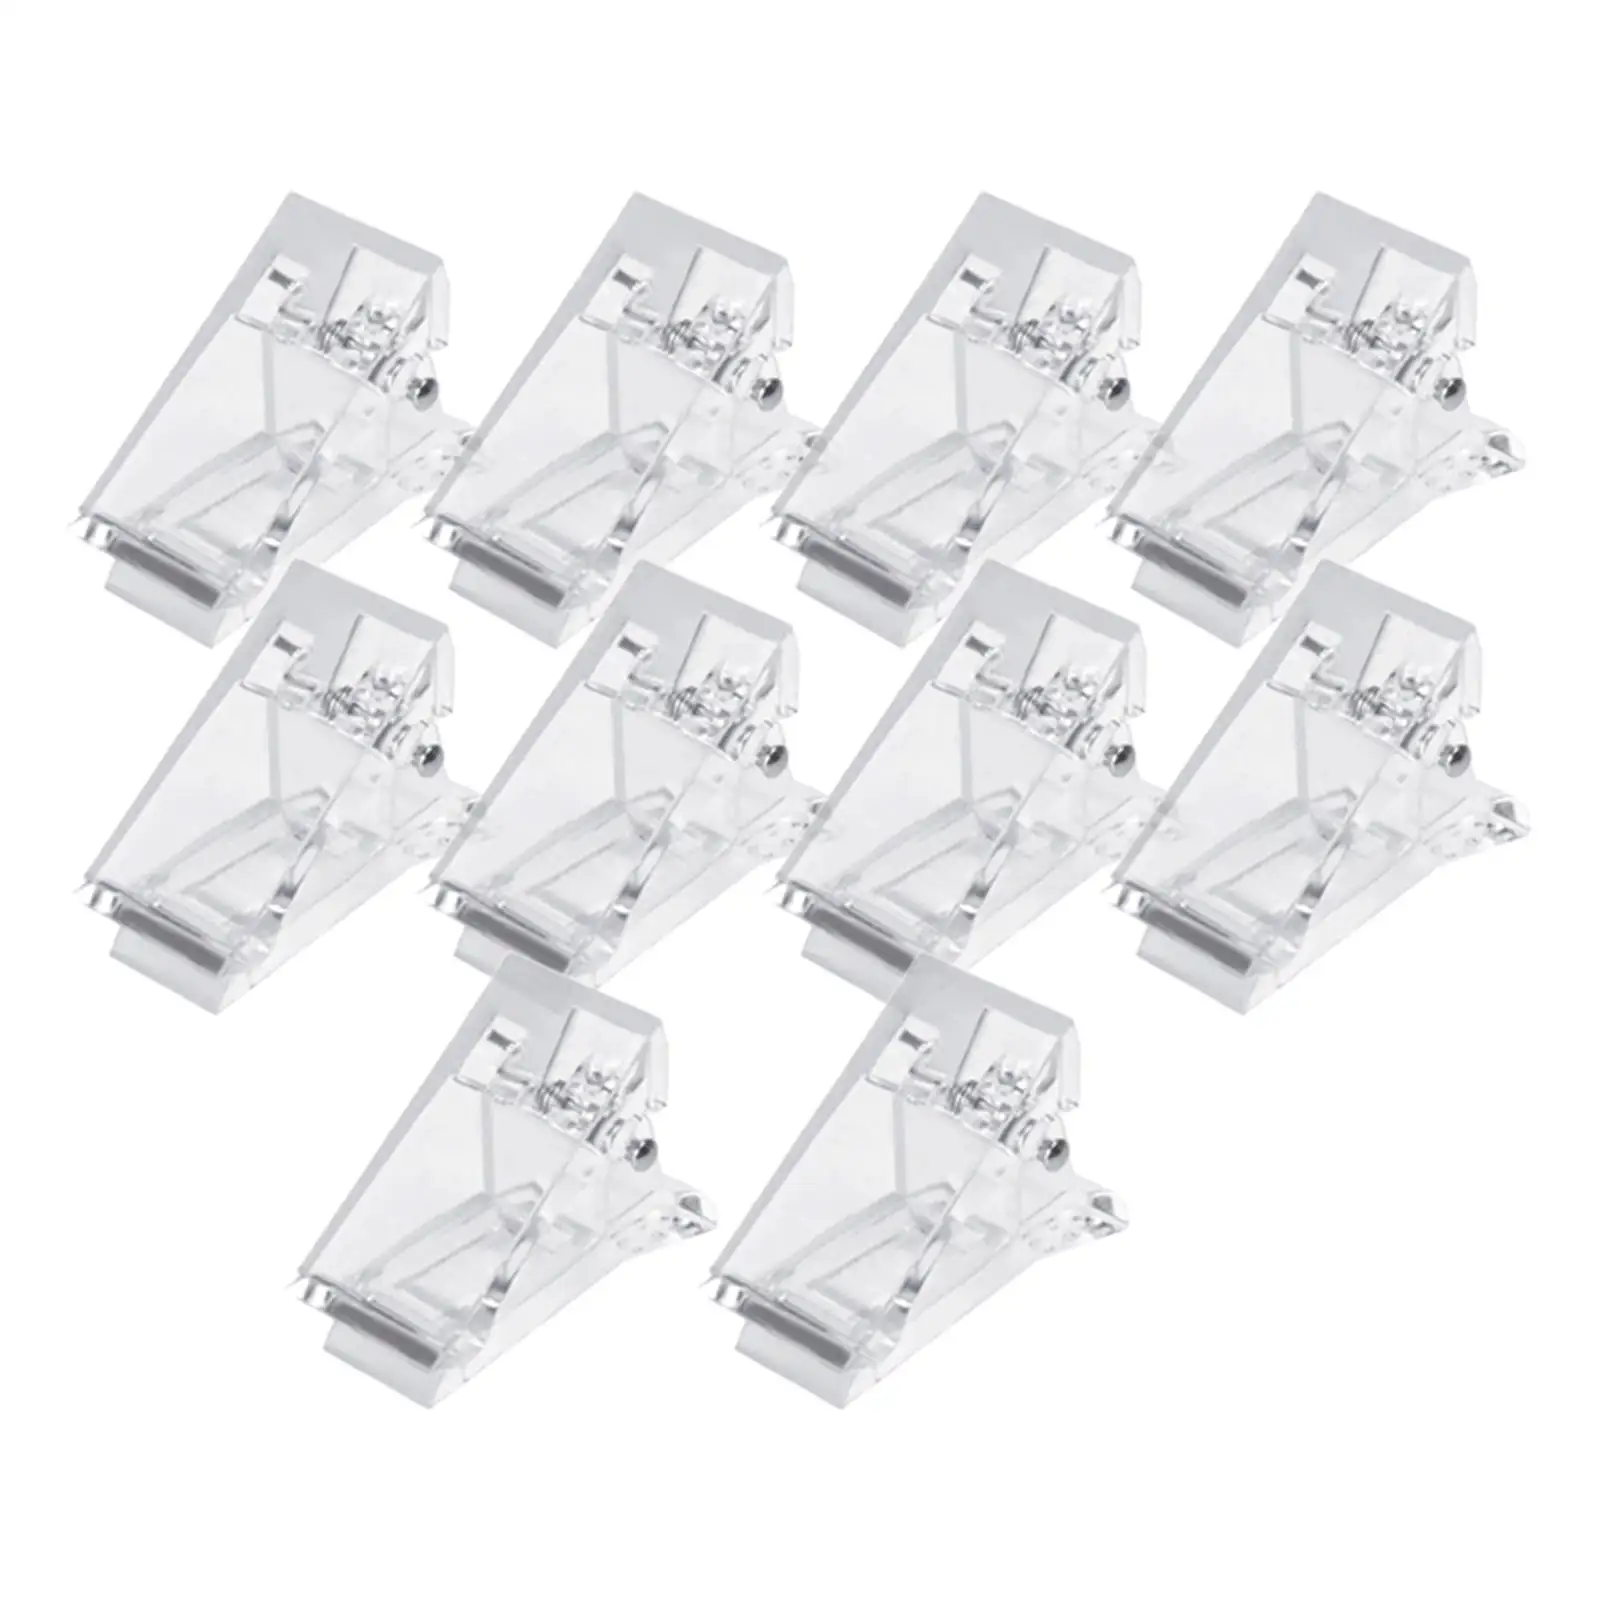 10x Poly Clamp Nail Tips Clip Manicure Extension Clips Tool Clips Gel Quick Building Set Transparent for Salon Home Use